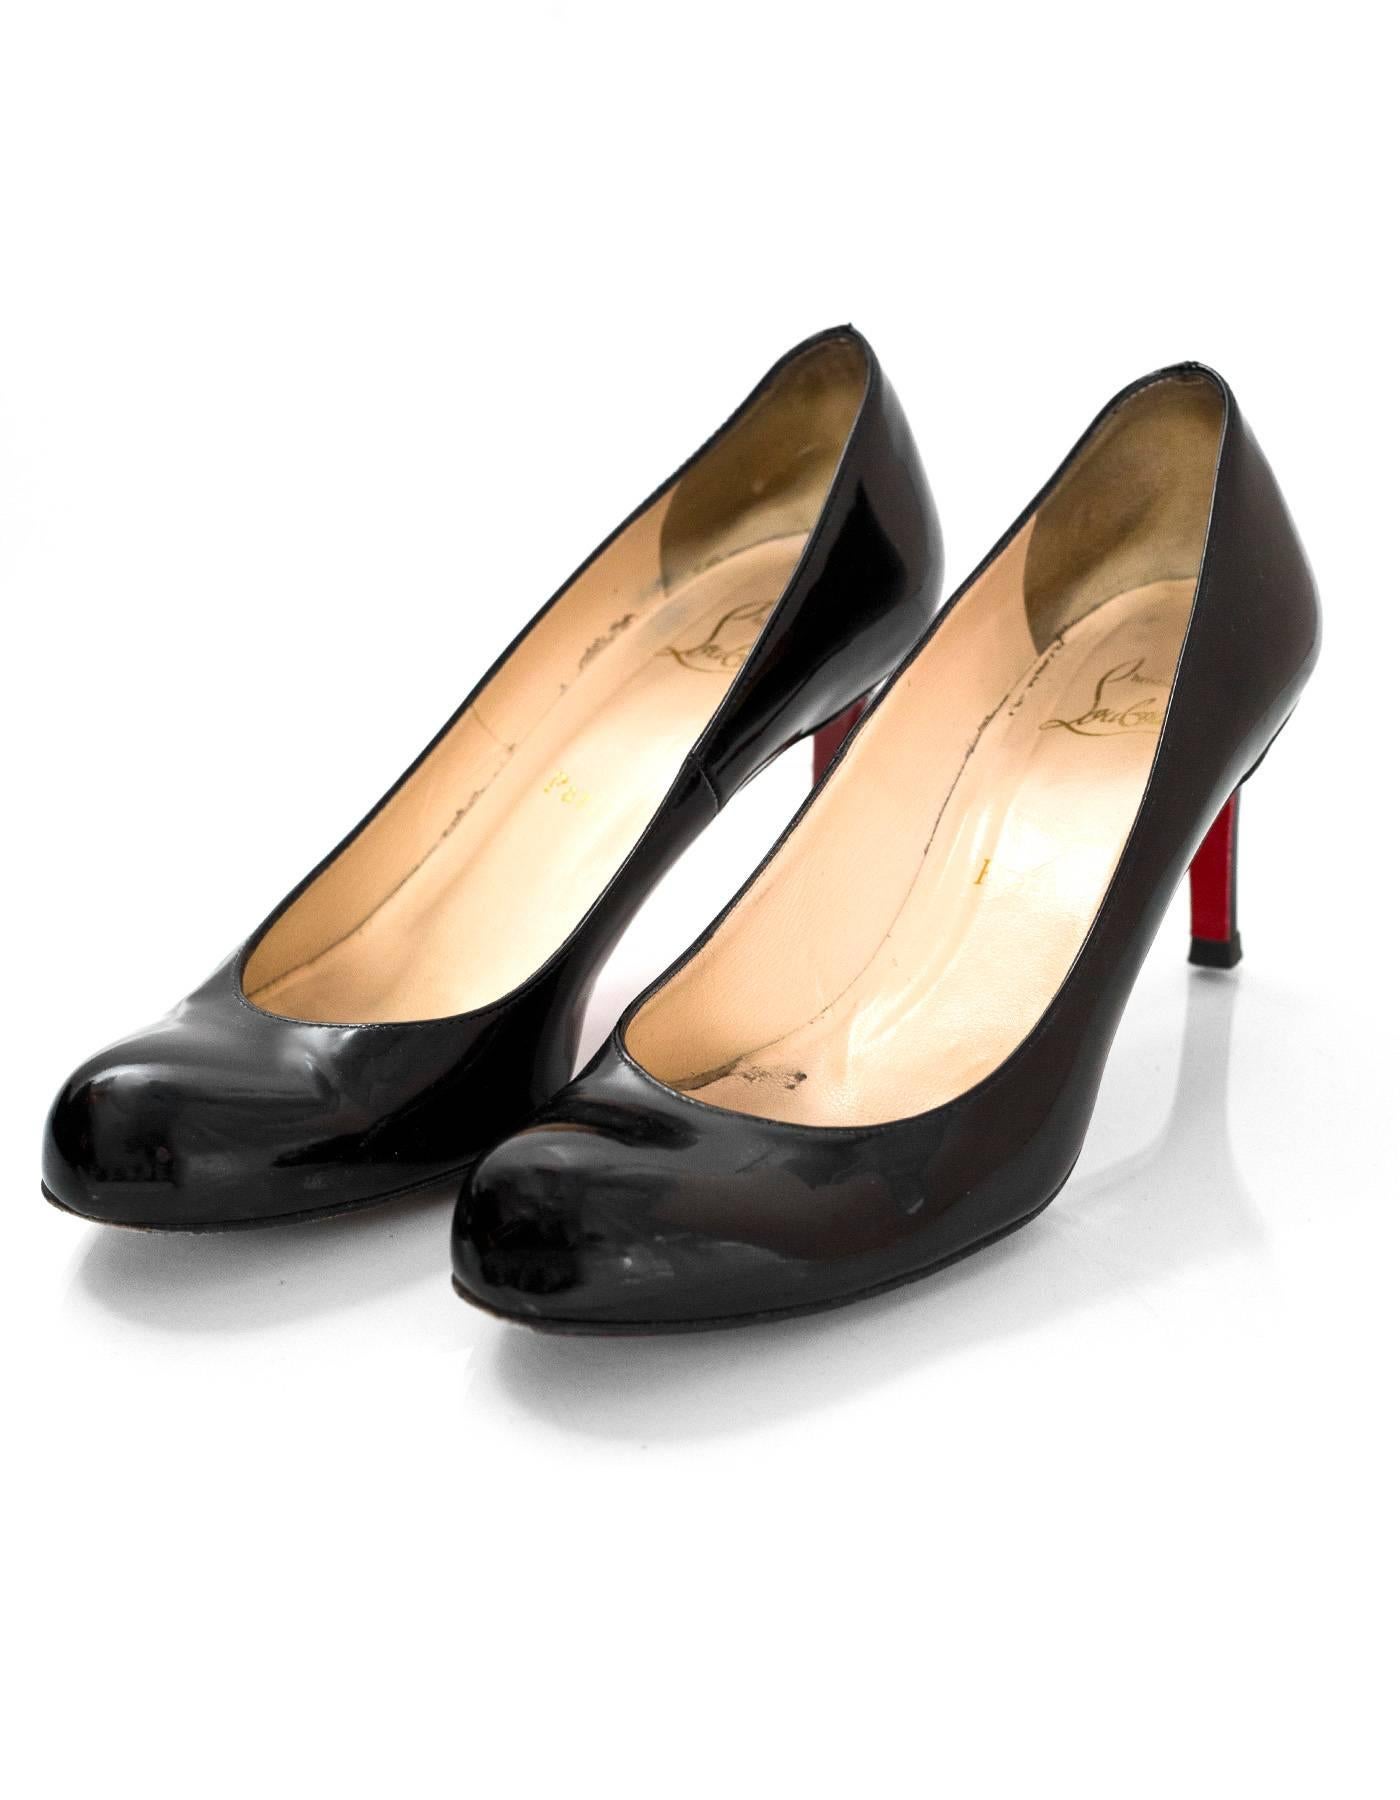 Christian Louboutin Black Patent Simple Pumps Sz 37

Made In: Italy
Color: Black
Materials: Patent leather
Closure/Opening: Slide on
Sole Stamp: Christian Louboutin made in Italy 37
Overall Condition: Very good pre-owned condition with the exception